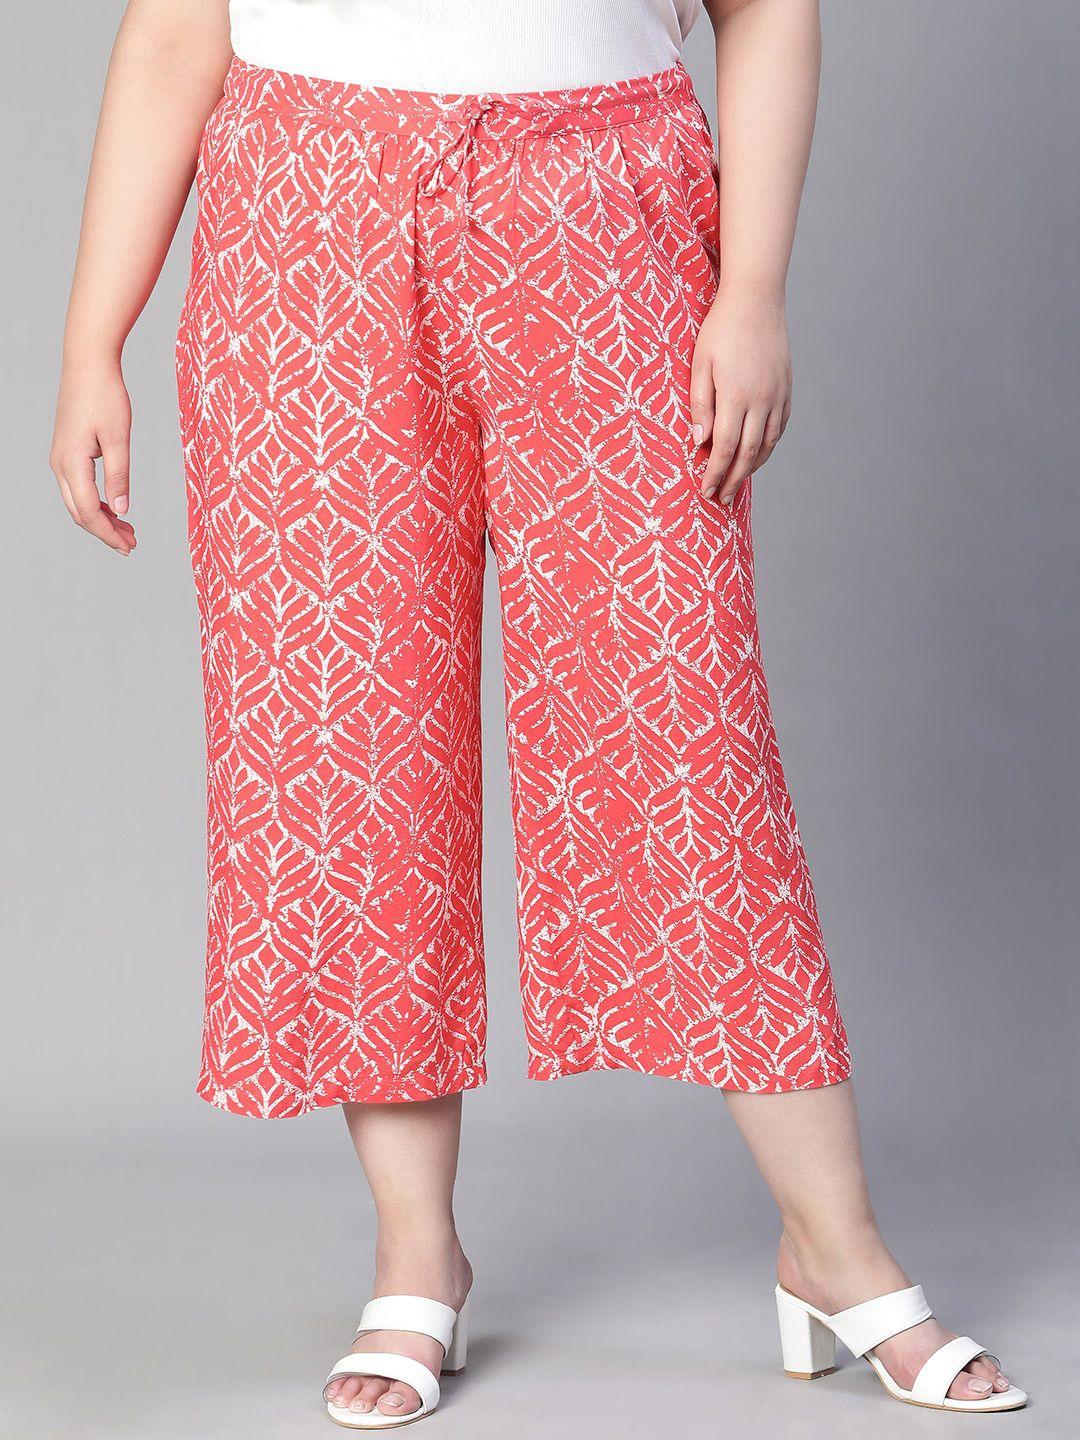 oxolloxo women plus size printed relaxed straight fit easy wash culottes